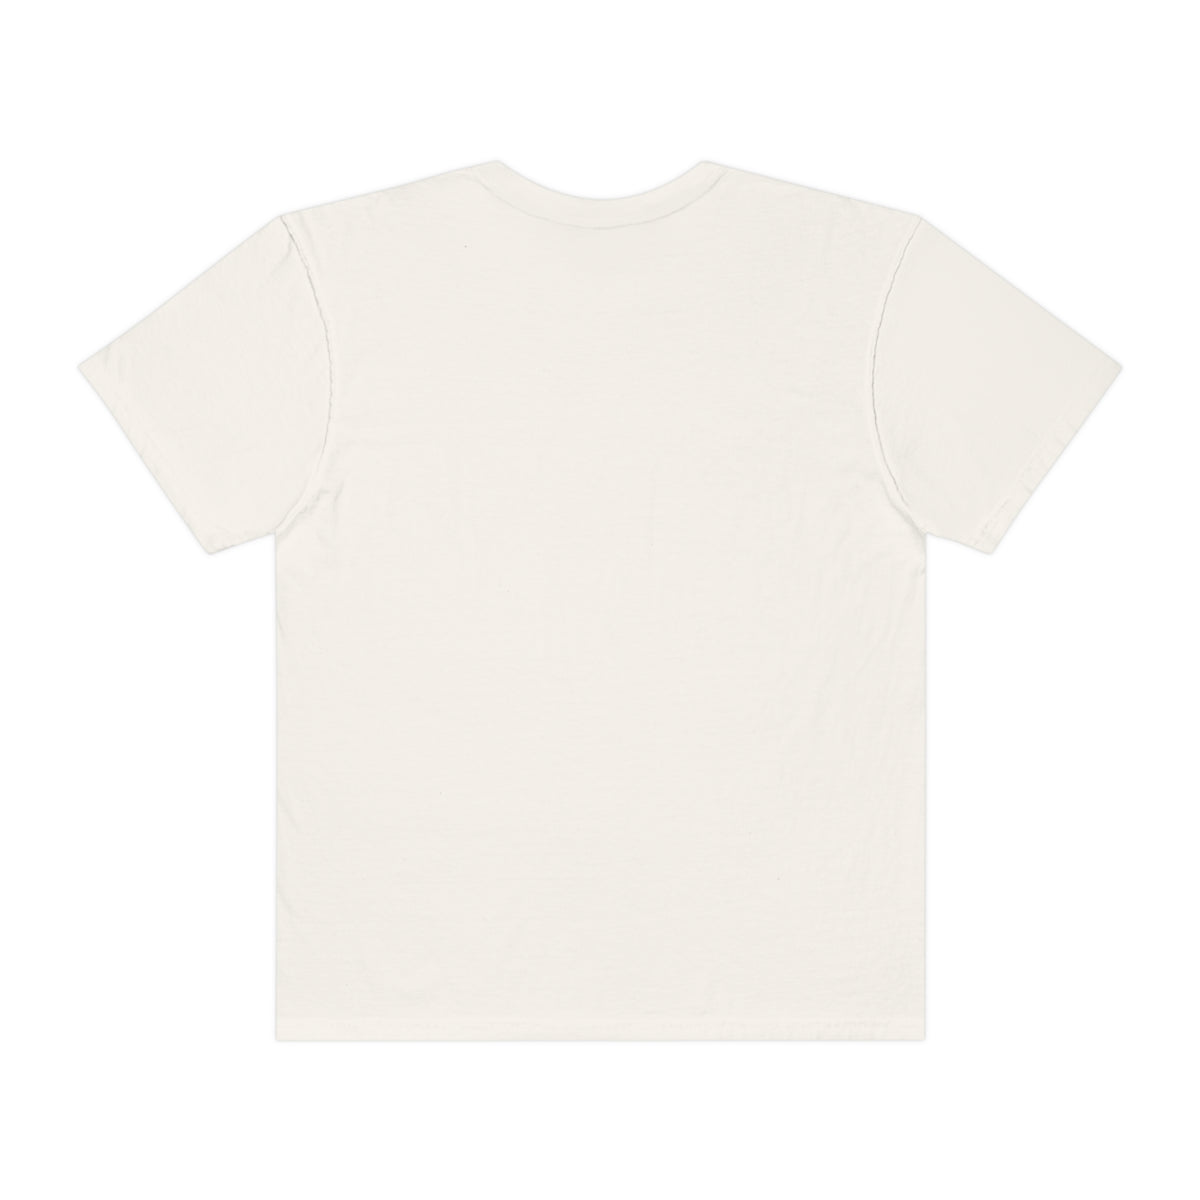 Watty and Ollie Unisex Garment-Dyed T-shirt